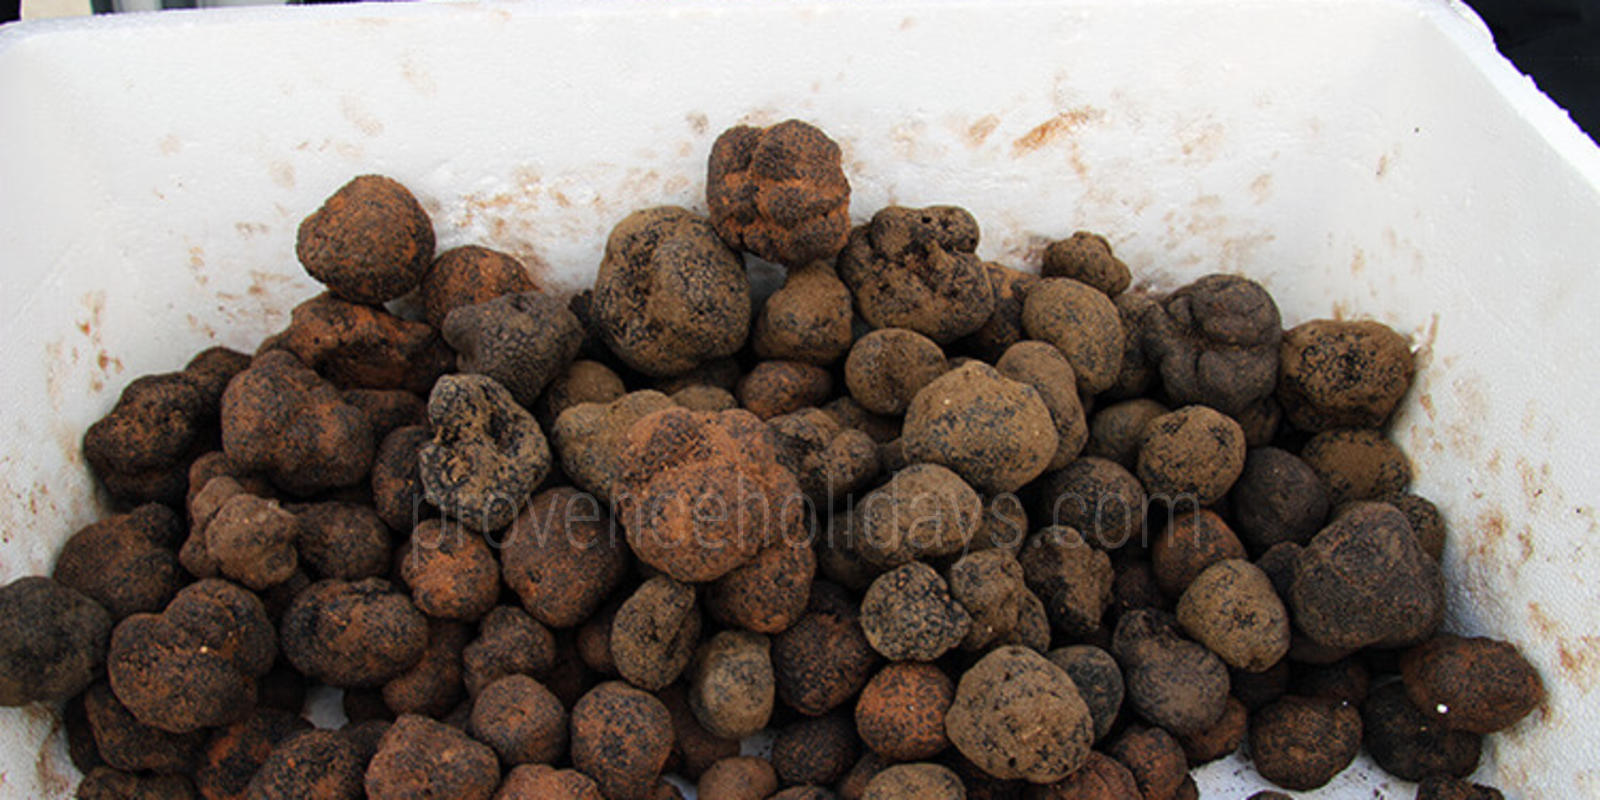 Richerenches truffle market - 0